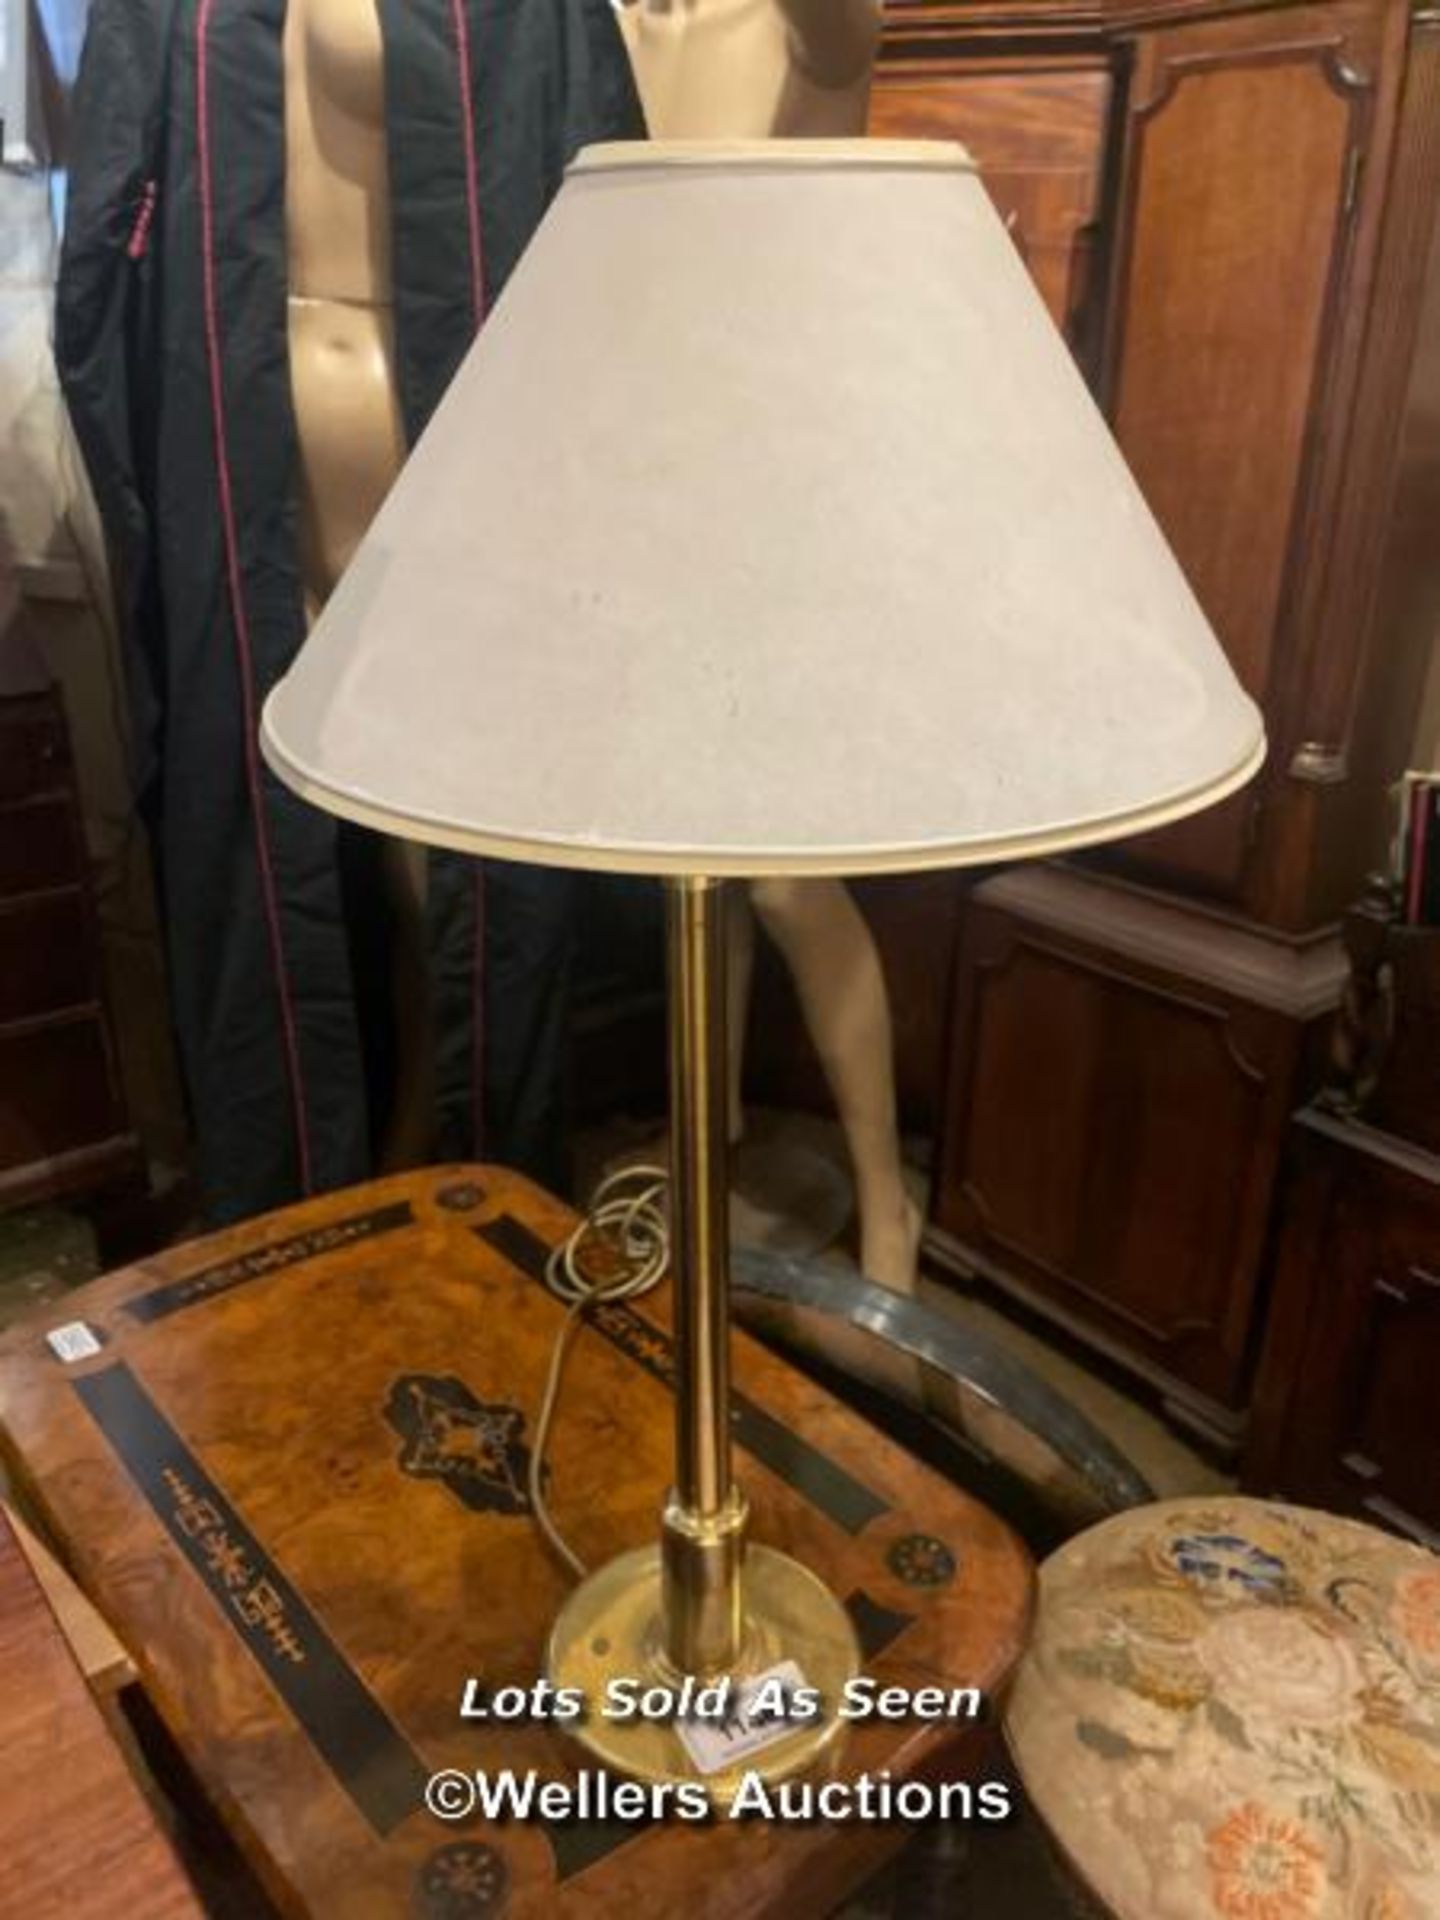 *BRASS TABLE LAMP / LOCATED AT VICTORIA ANTIQUES, WADEBRIDGE, PL27 7DD